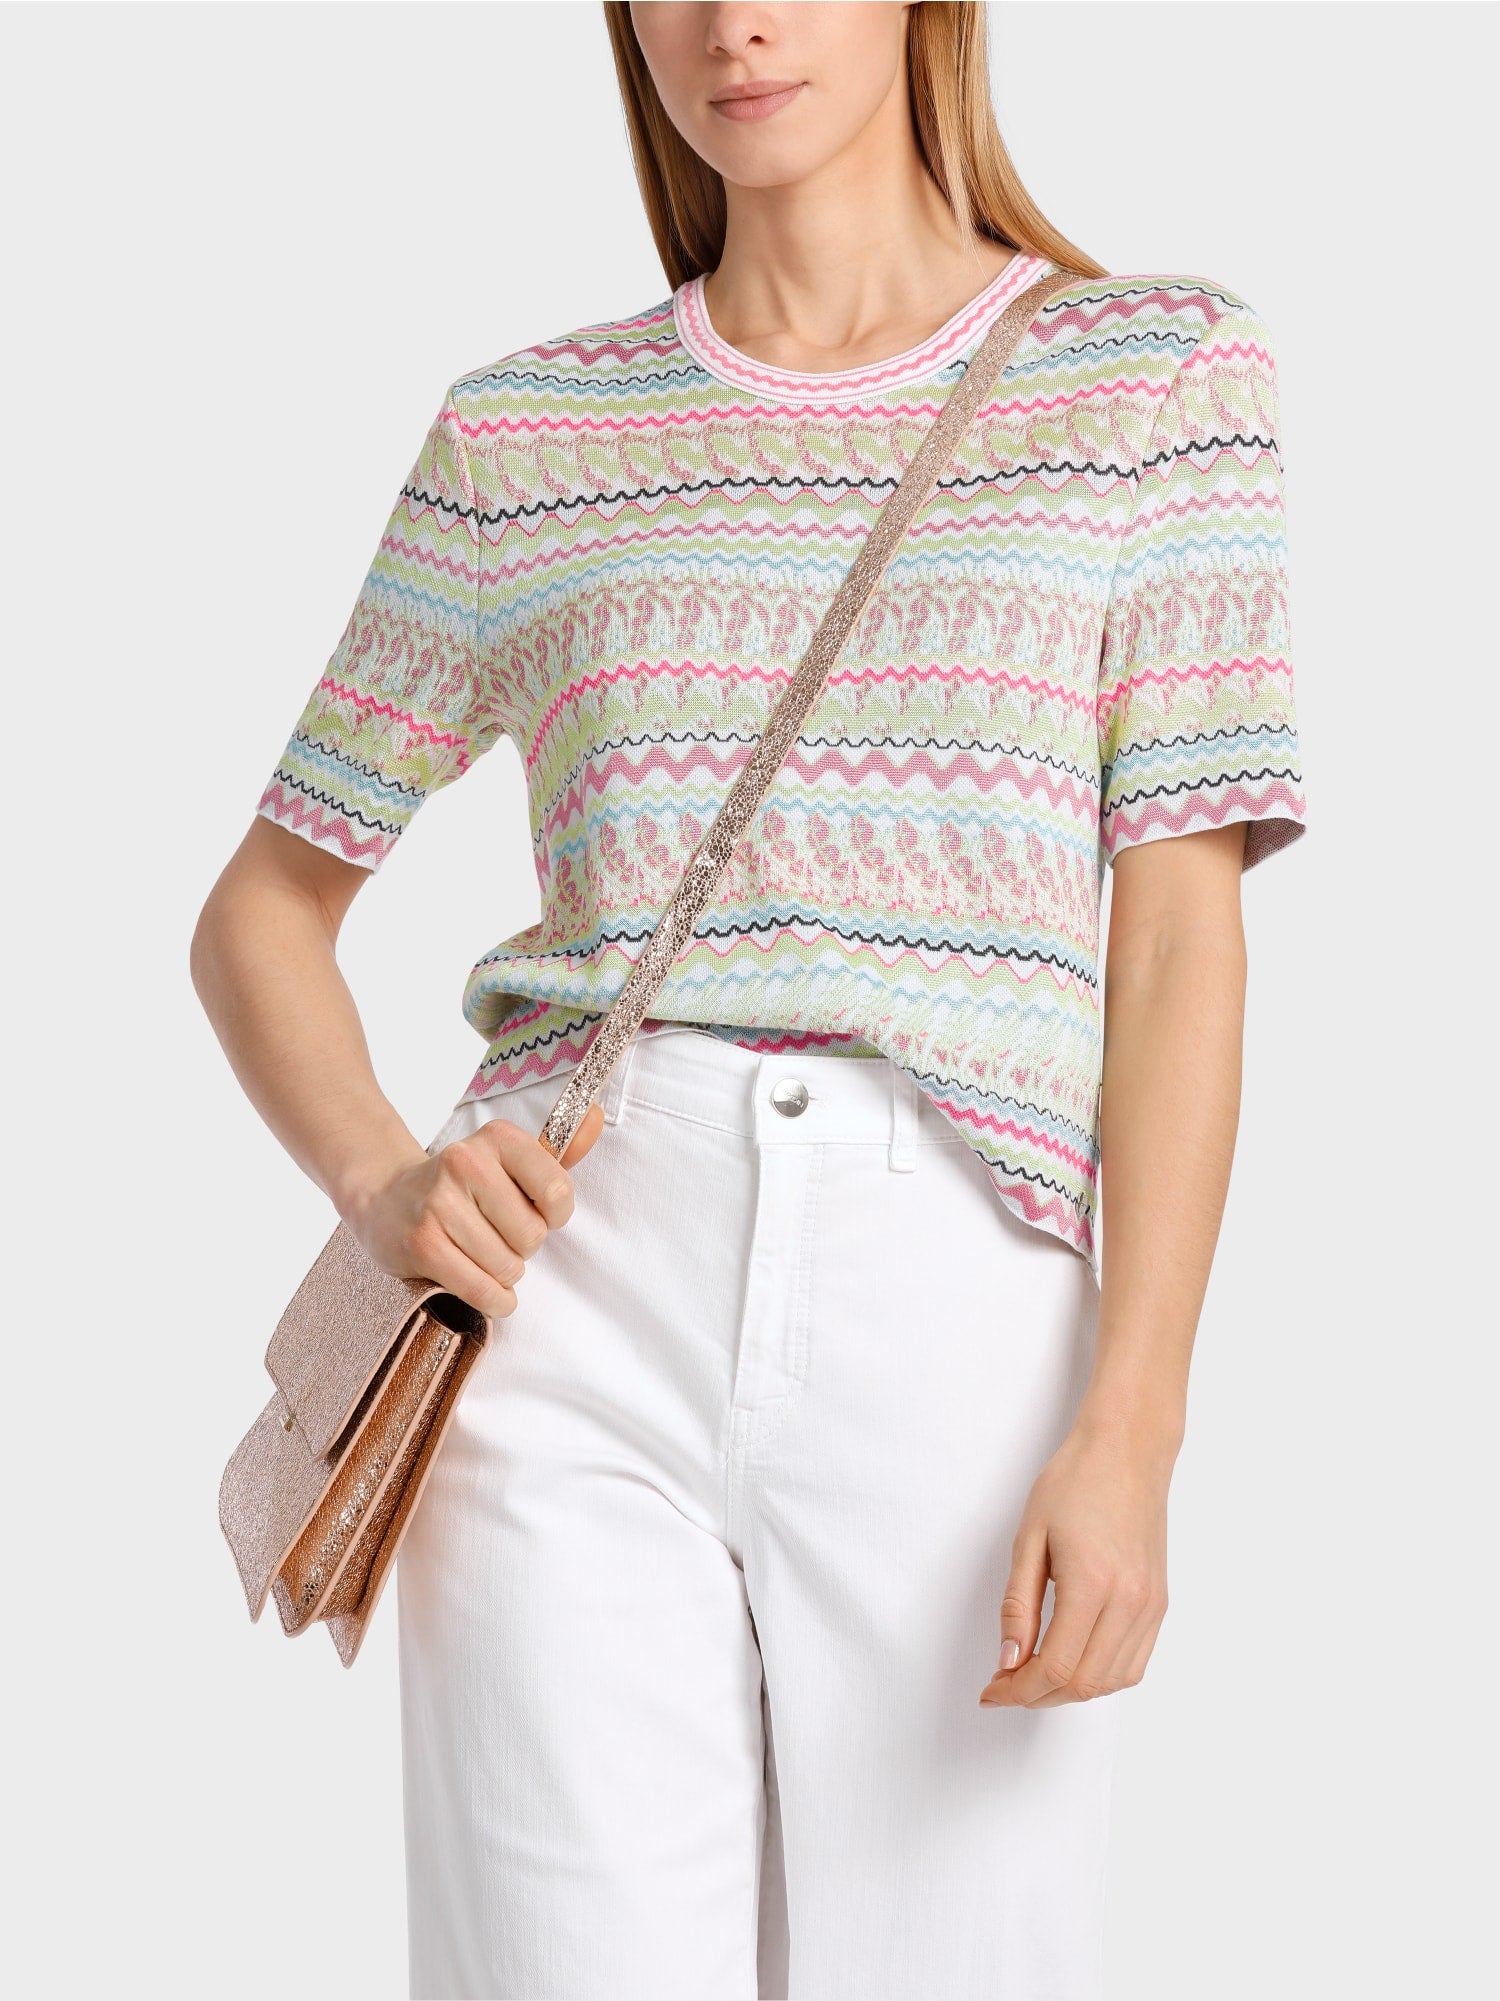 MARC CAIN SHORT-SLEEVED SWEATER KNITTED IN GERMANY